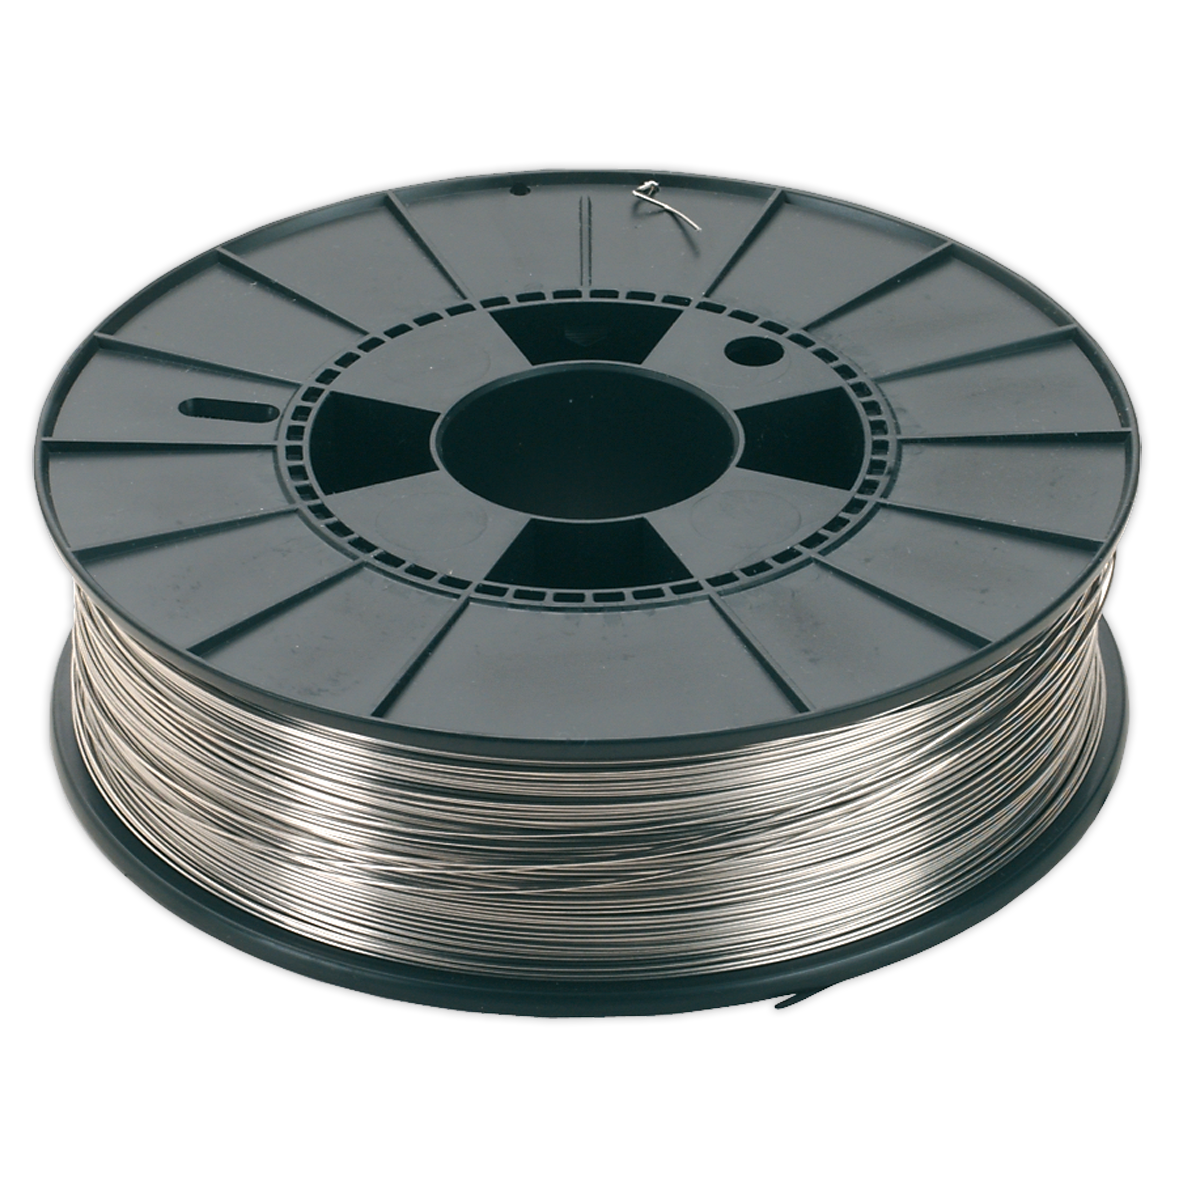 SEALEY - MIG/5K/SS08 Stainless Steel MIG Wire 5kg 0.8mm 308(S)93 Grade